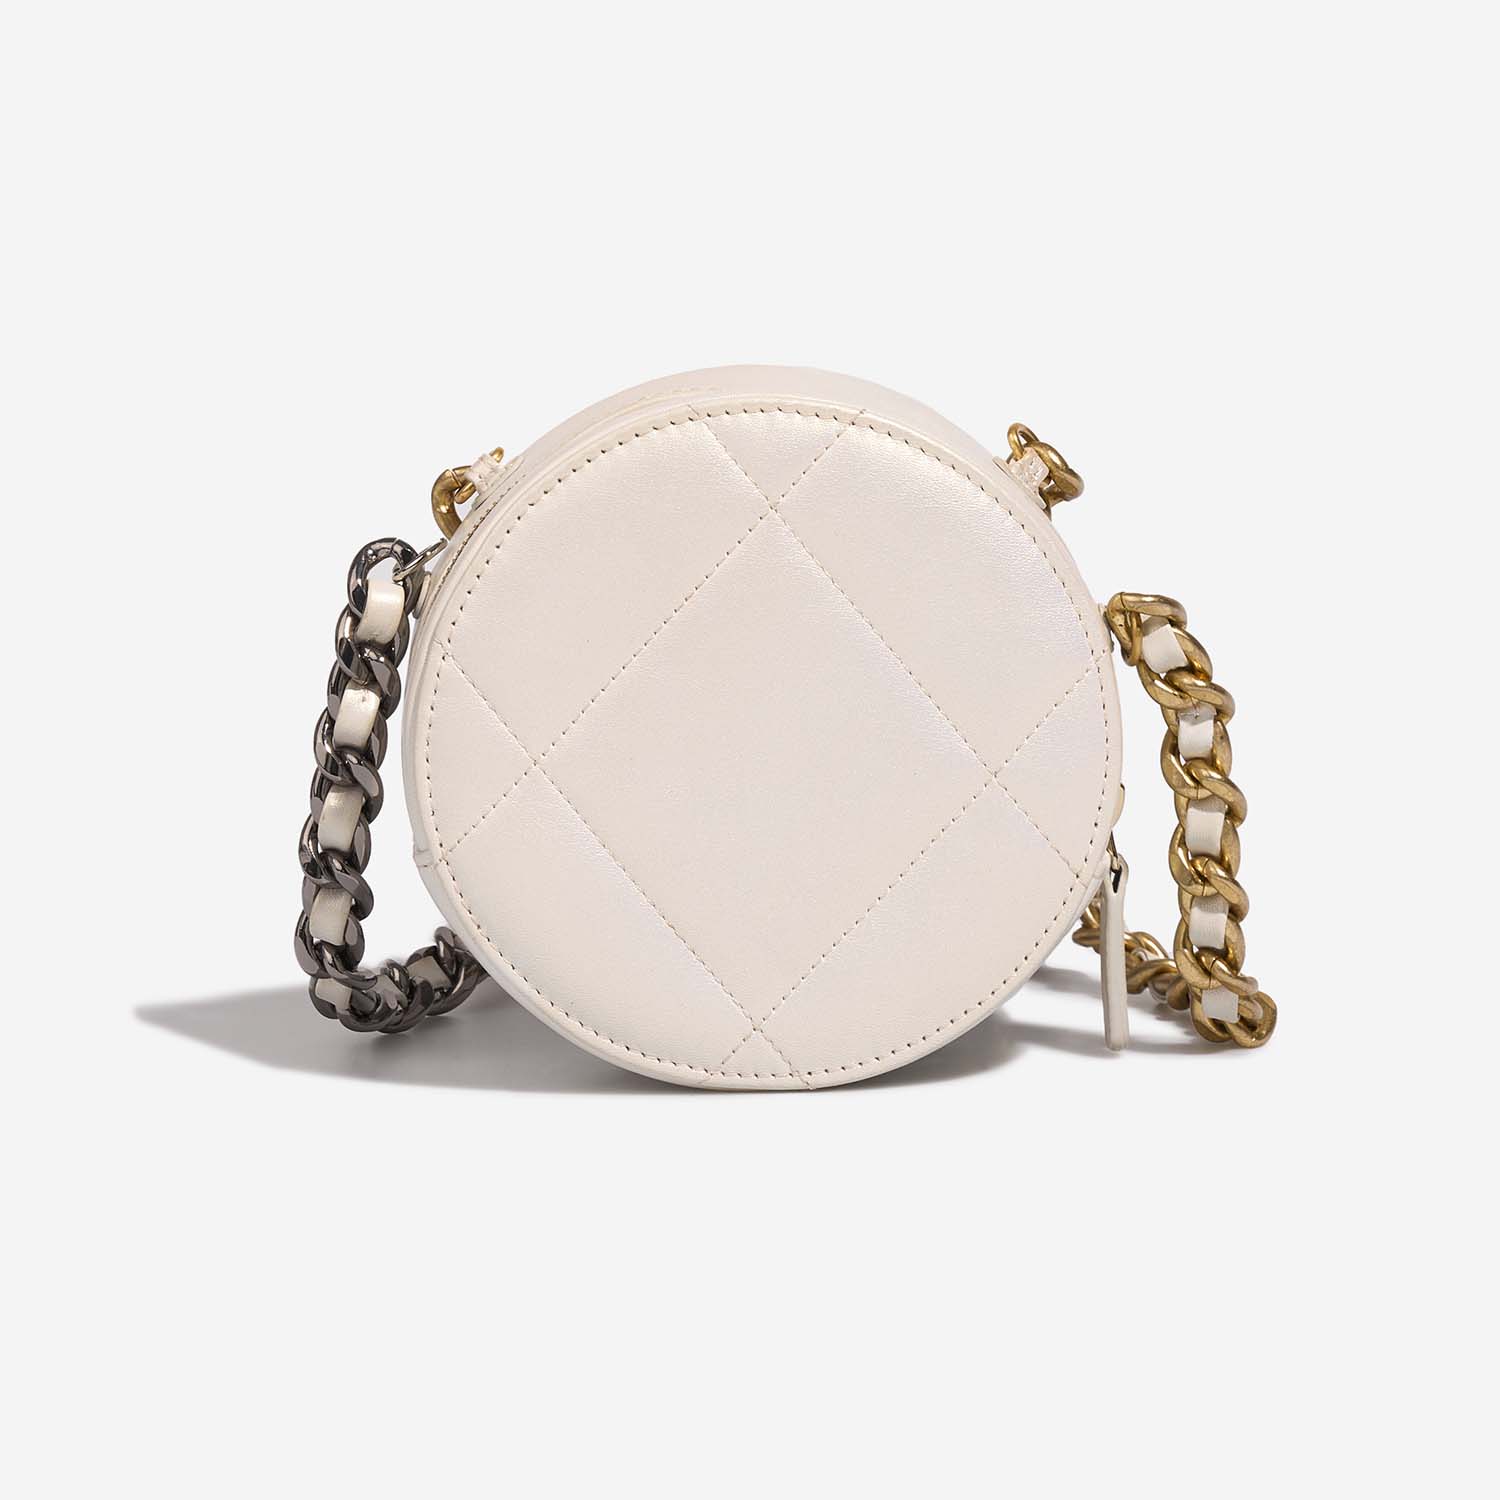 Chanel 19 RoundClutch PearlWhite Back  | Sell your designer bag on Saclab.com